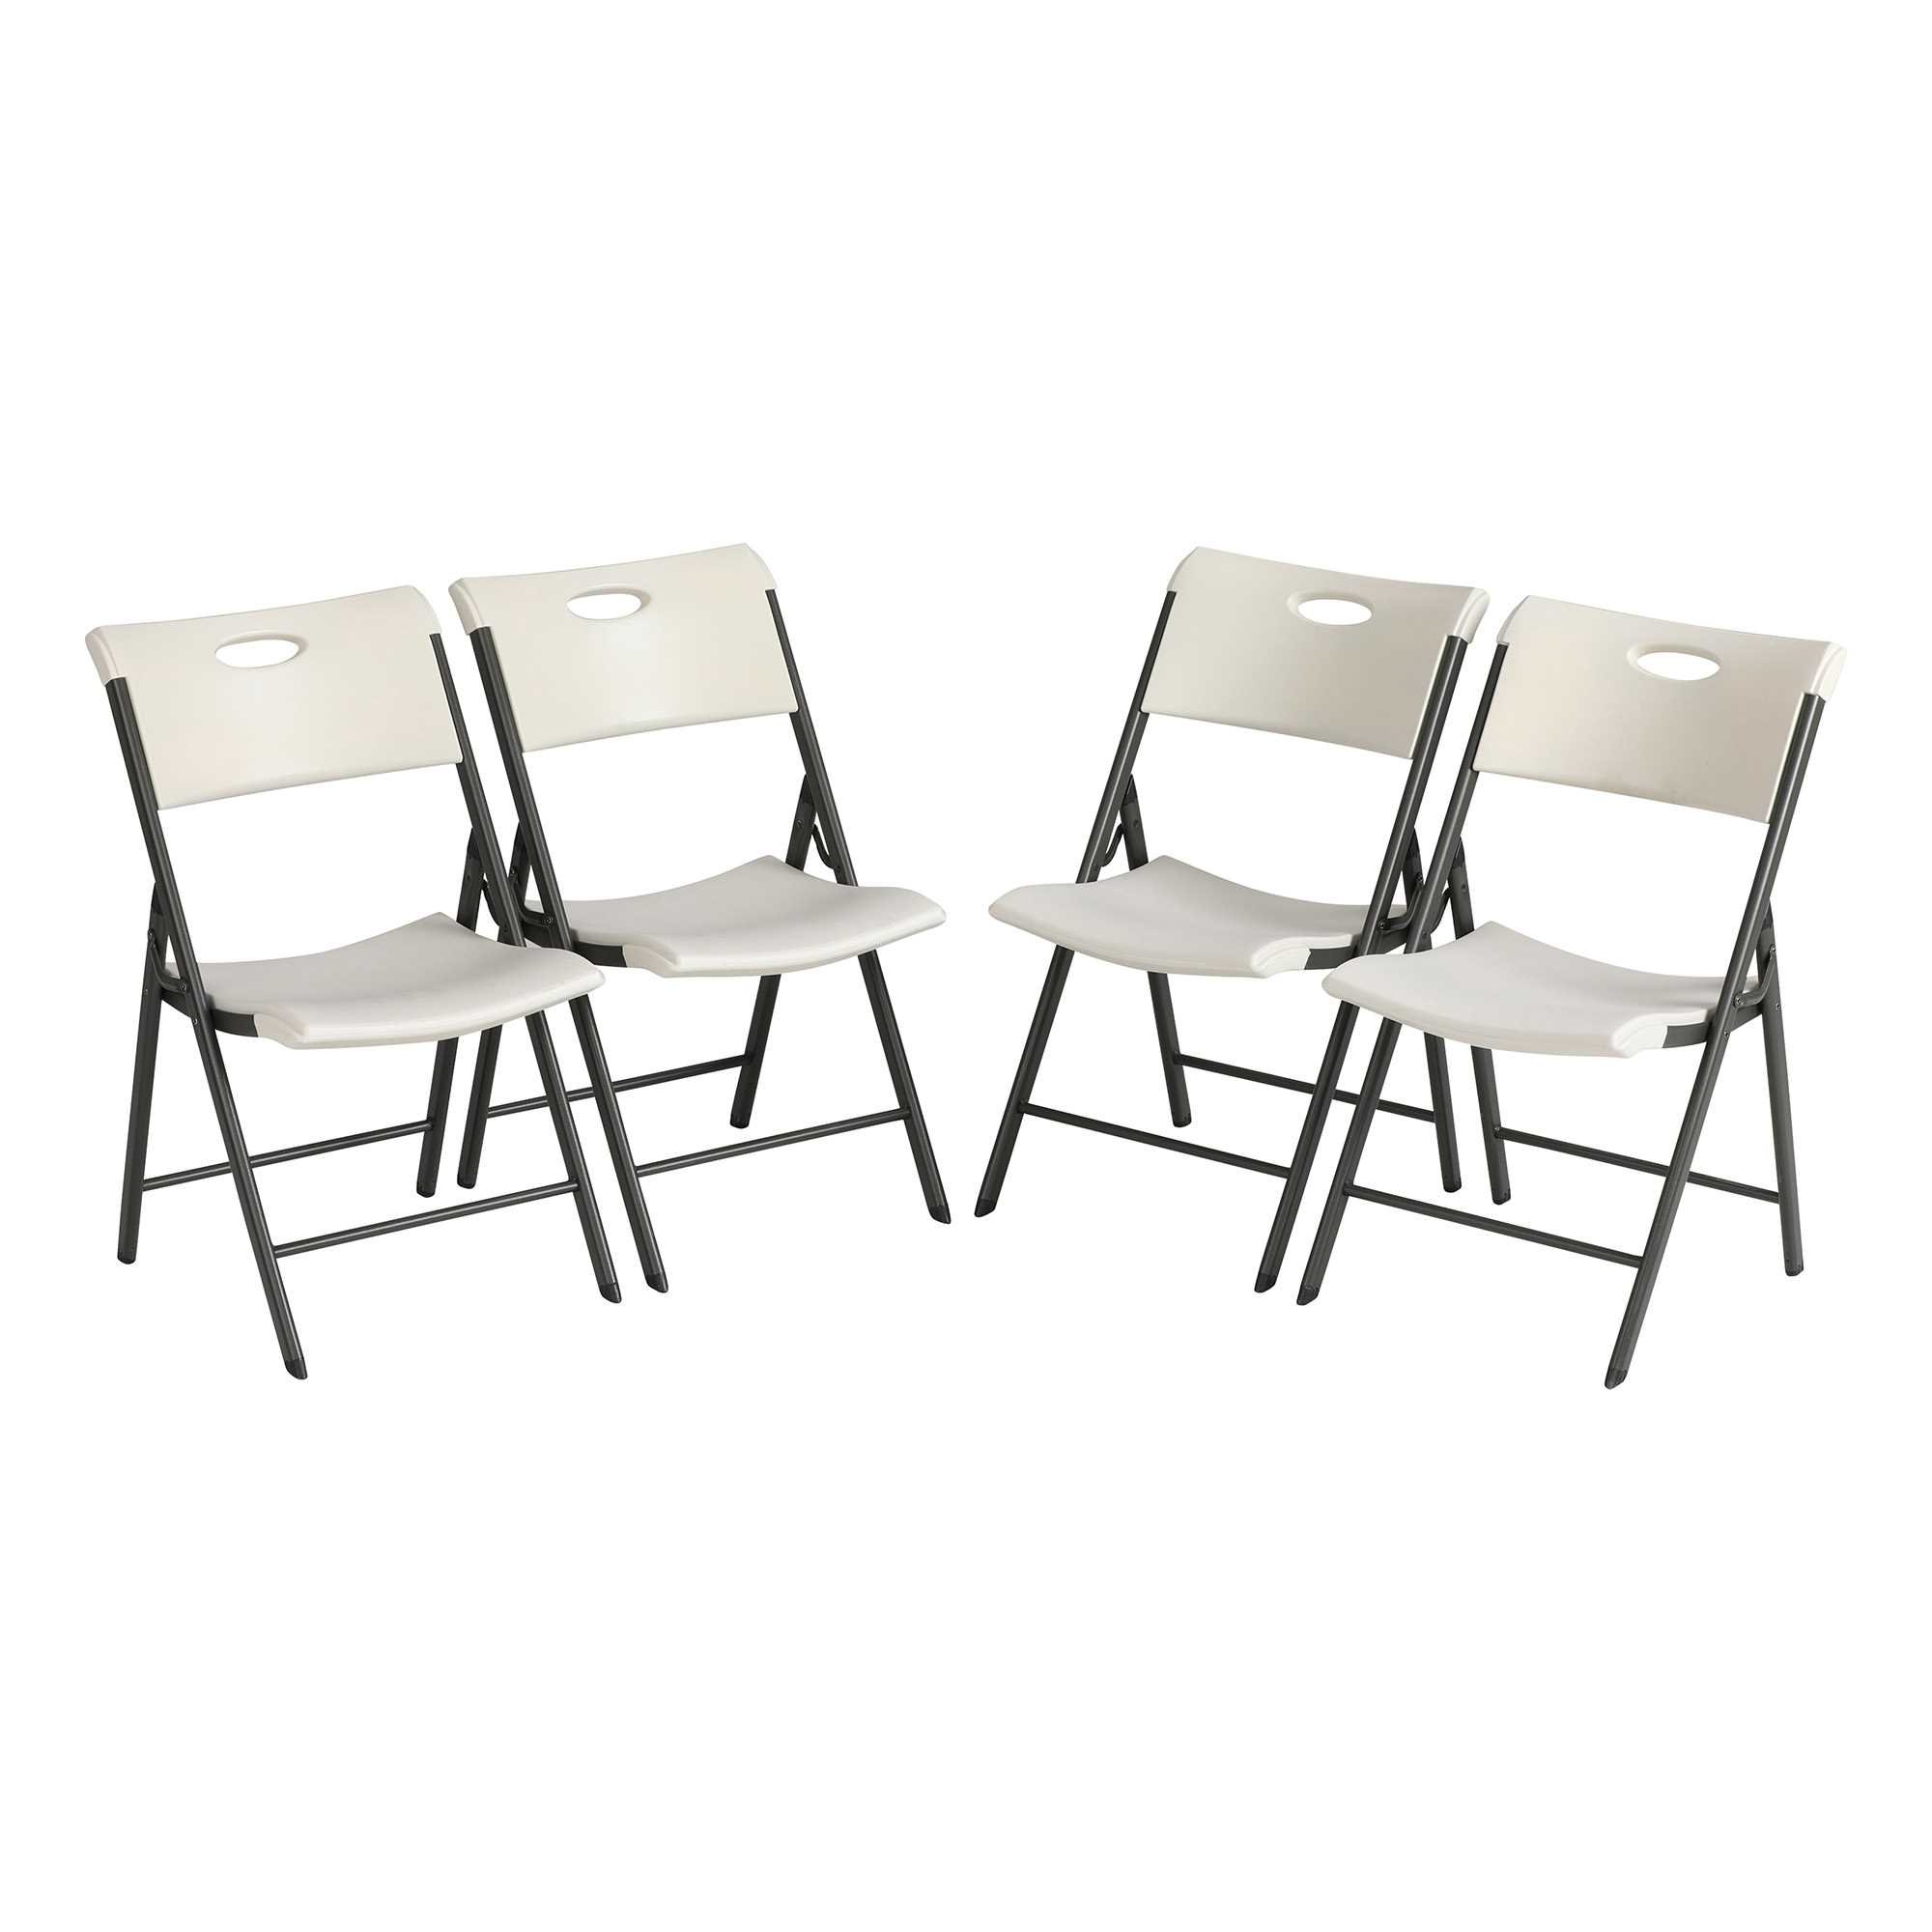 Lifetime Folding Chair, Contemporary - Pack of 4, Almond